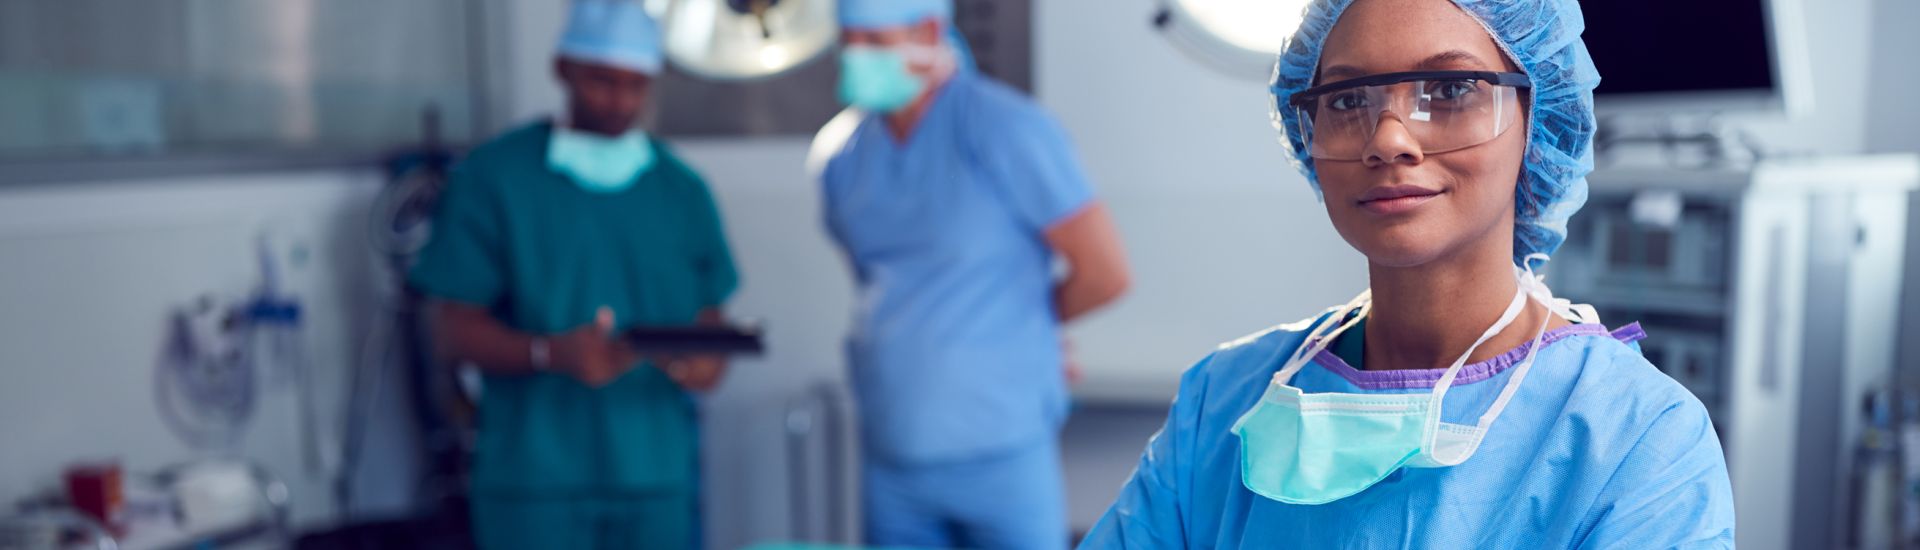 female surgeon standing in operating room